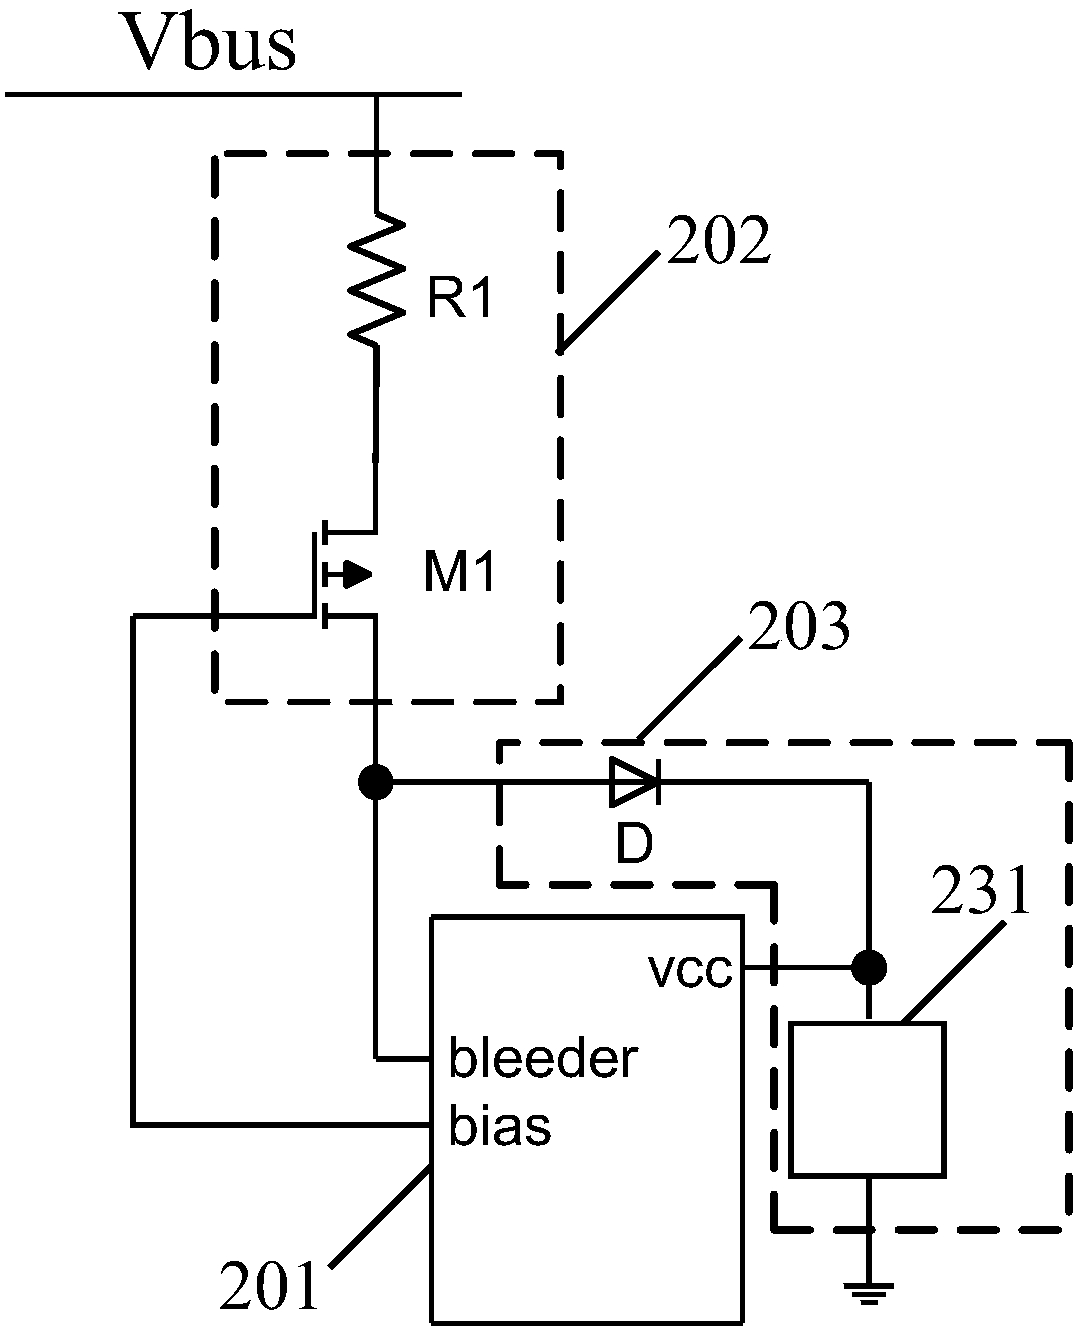 A led dimming control circuit